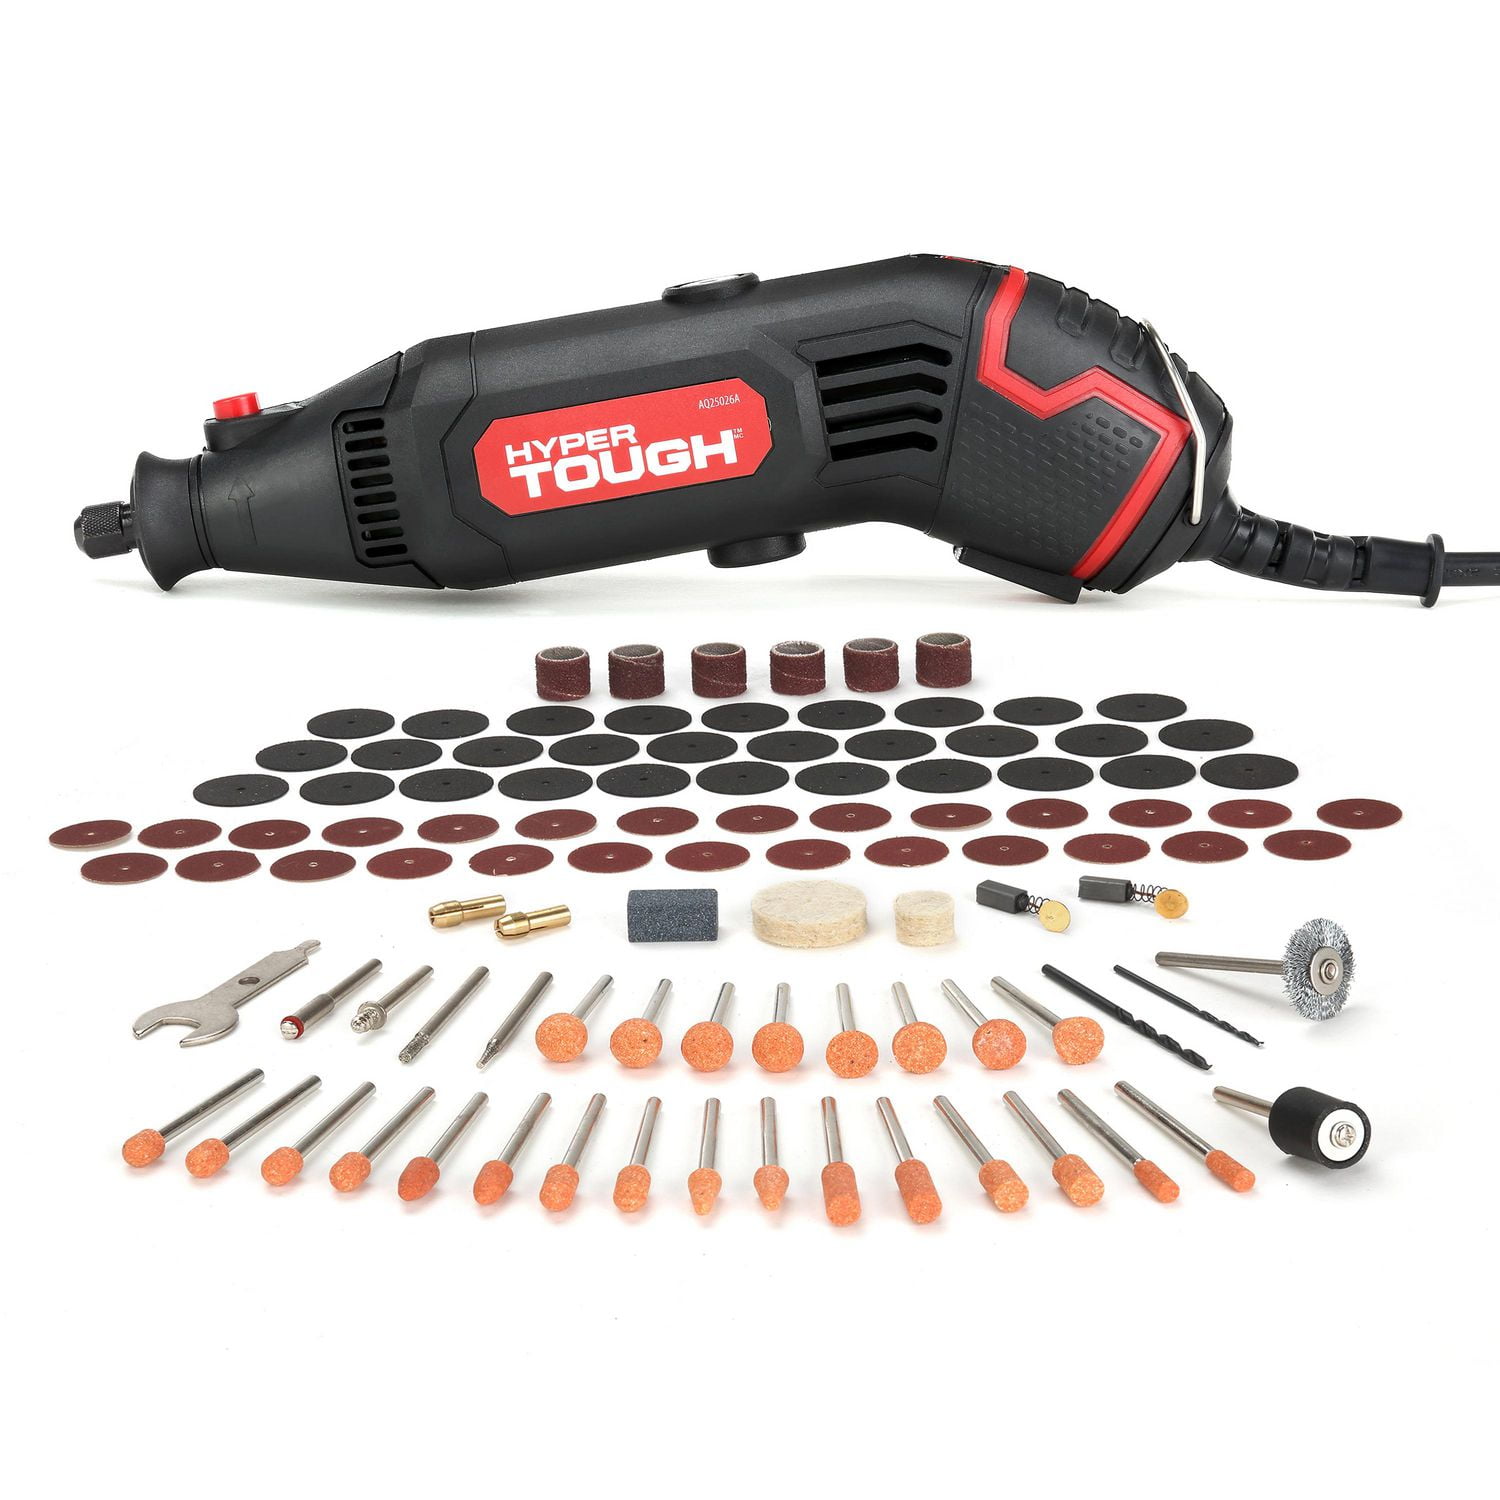 HYPER TOUGH 1.5AMP 106PC VARIABLE SPEED ROTARY TOOL WITH ACCESSORY KIT,  HYPER TOUGH 1.5AMP 106PCS ROTARY TOOL SET 